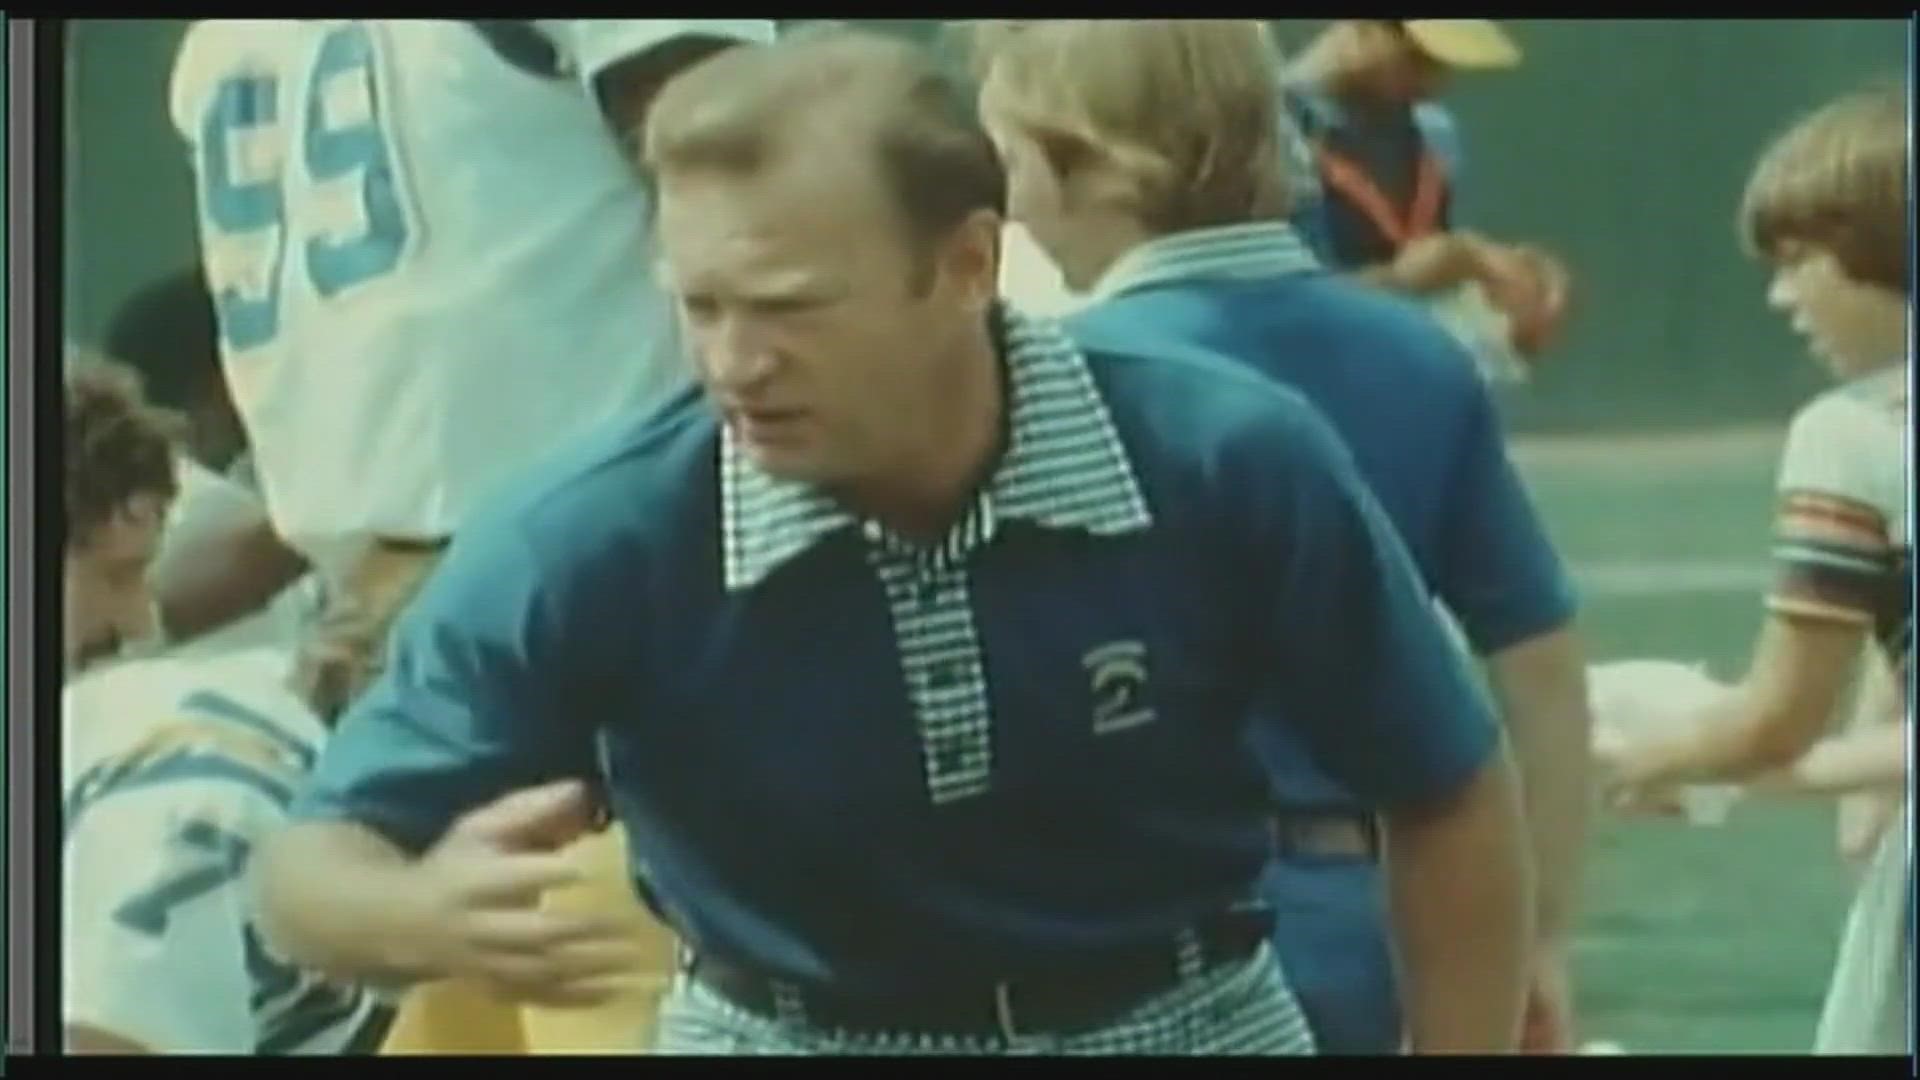 Coryell is credited with creating the Air Coryell offense, was the first head coach to win more than 100 games at the collegiate and professional level.